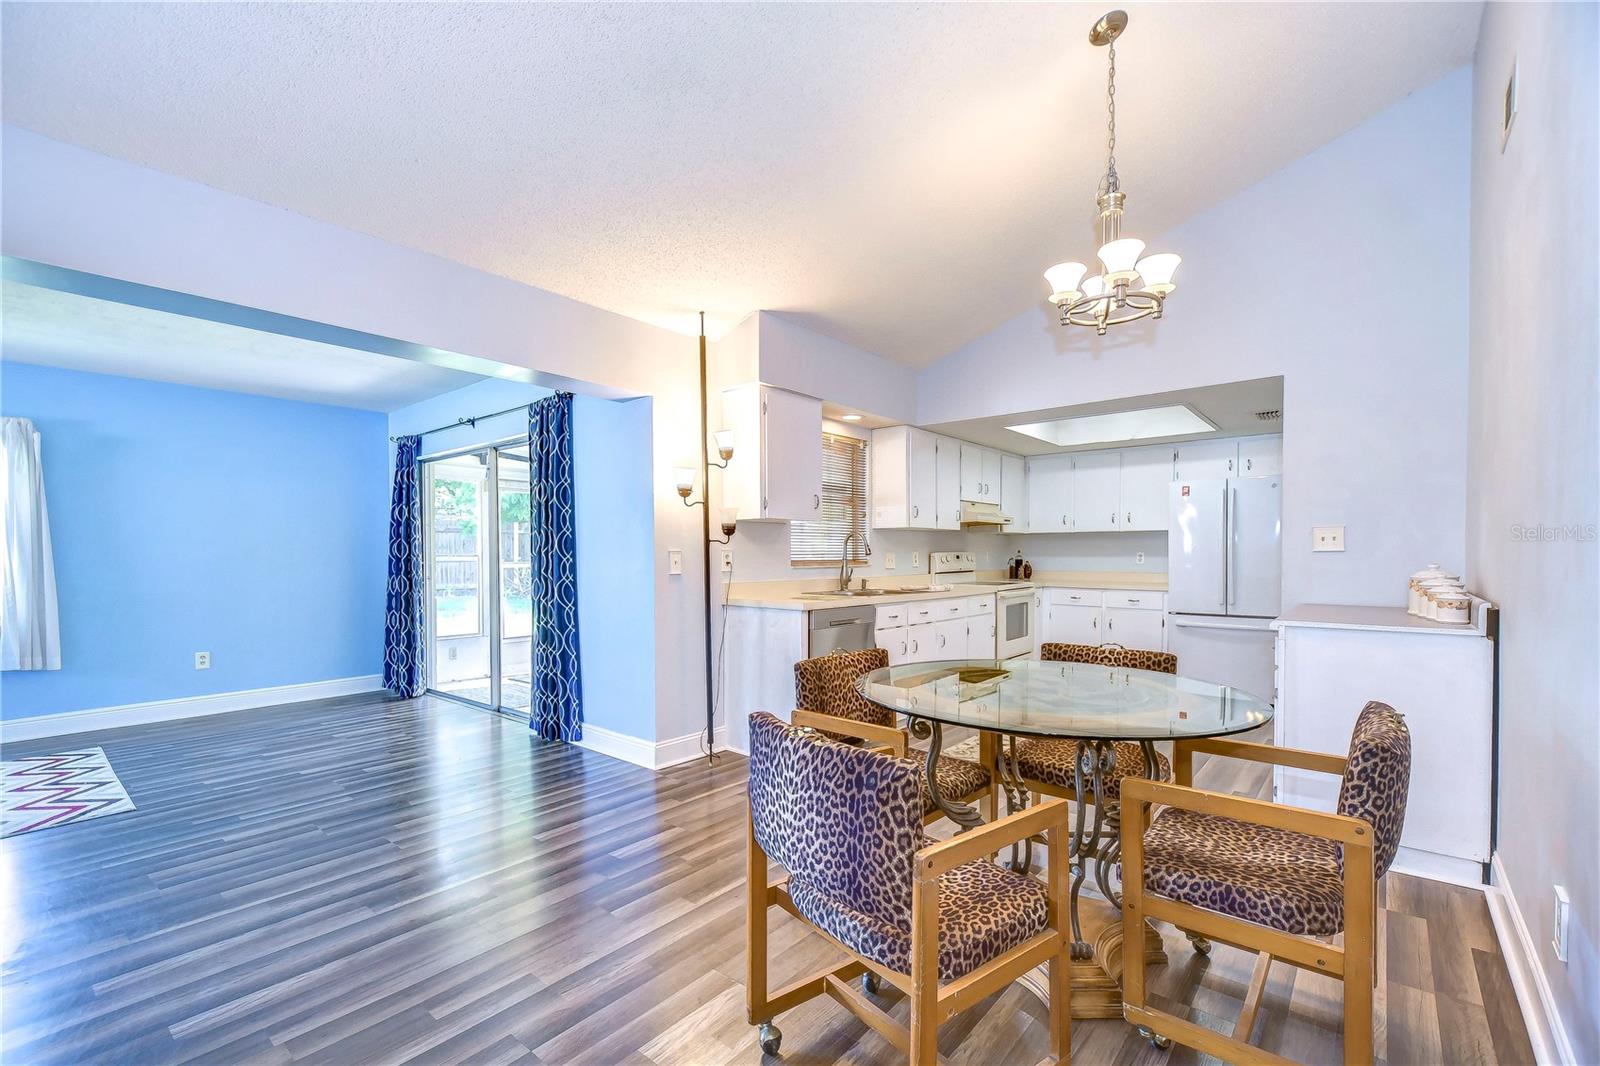 Breakfast nook is the perfect space for family meals!